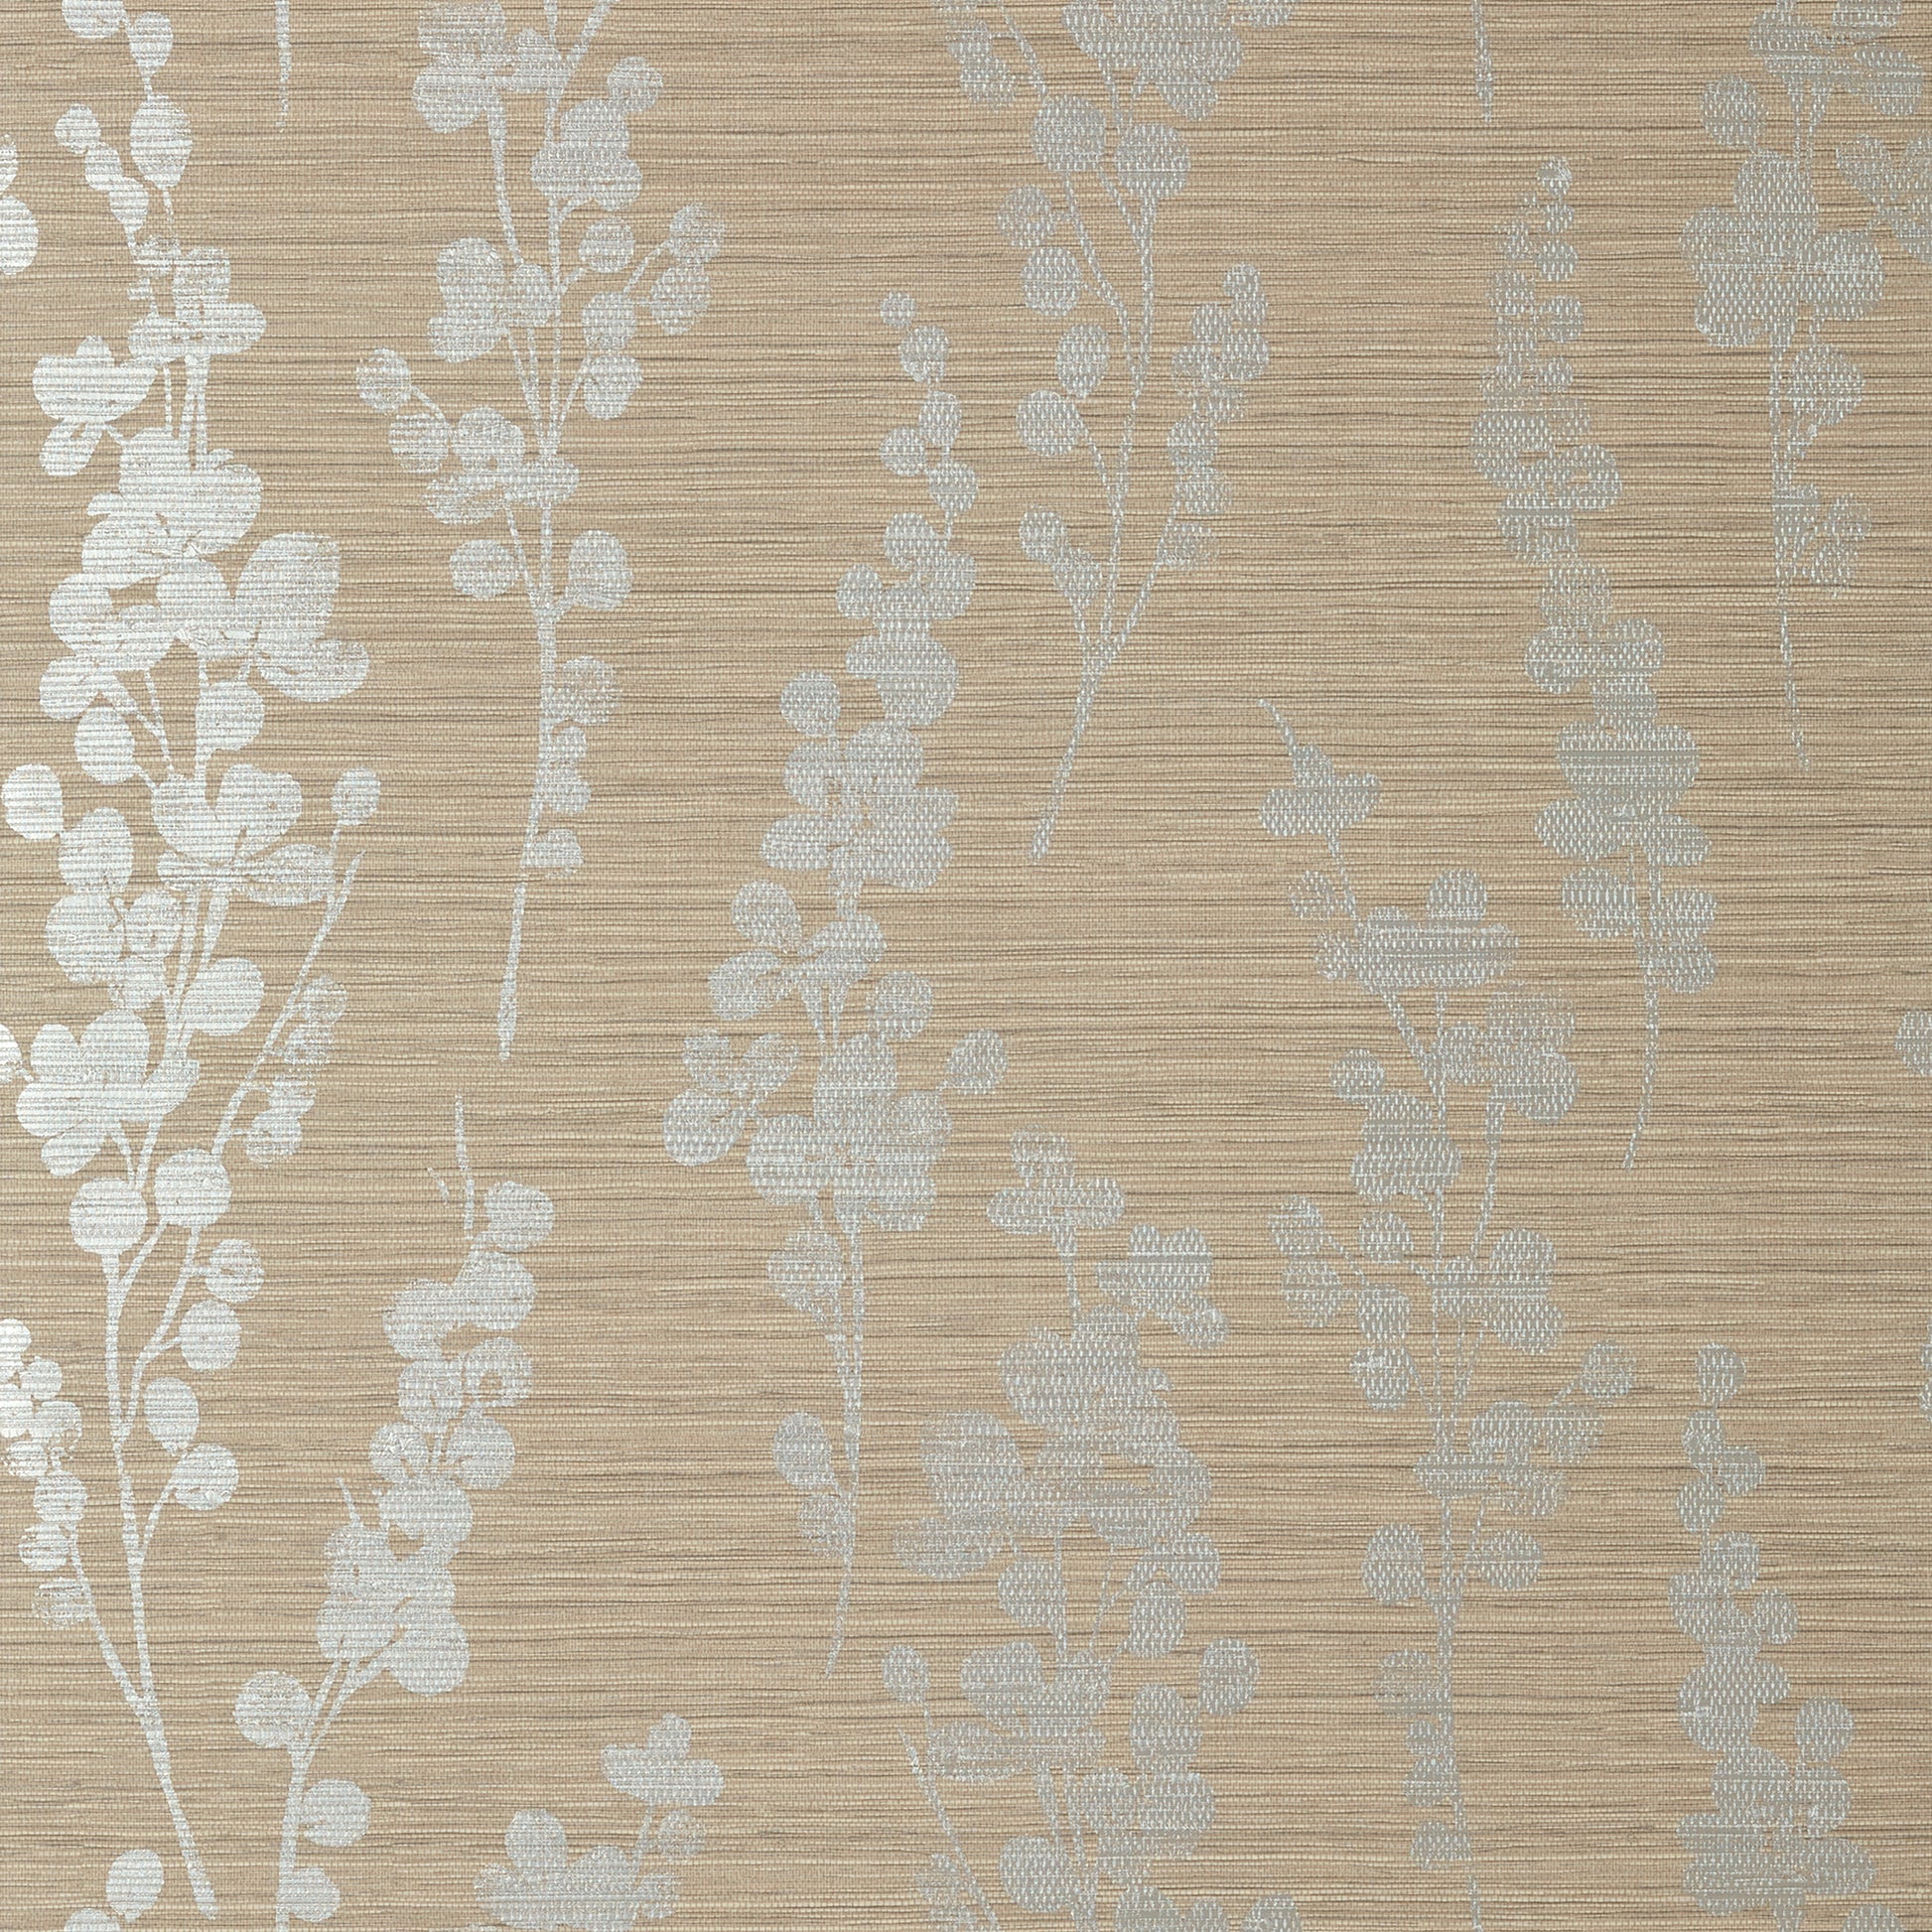 Purchase Thibaut Wallpaper Pattern number T41053 pattern name Spring Blooms color Metallic Silver on Taupe. 